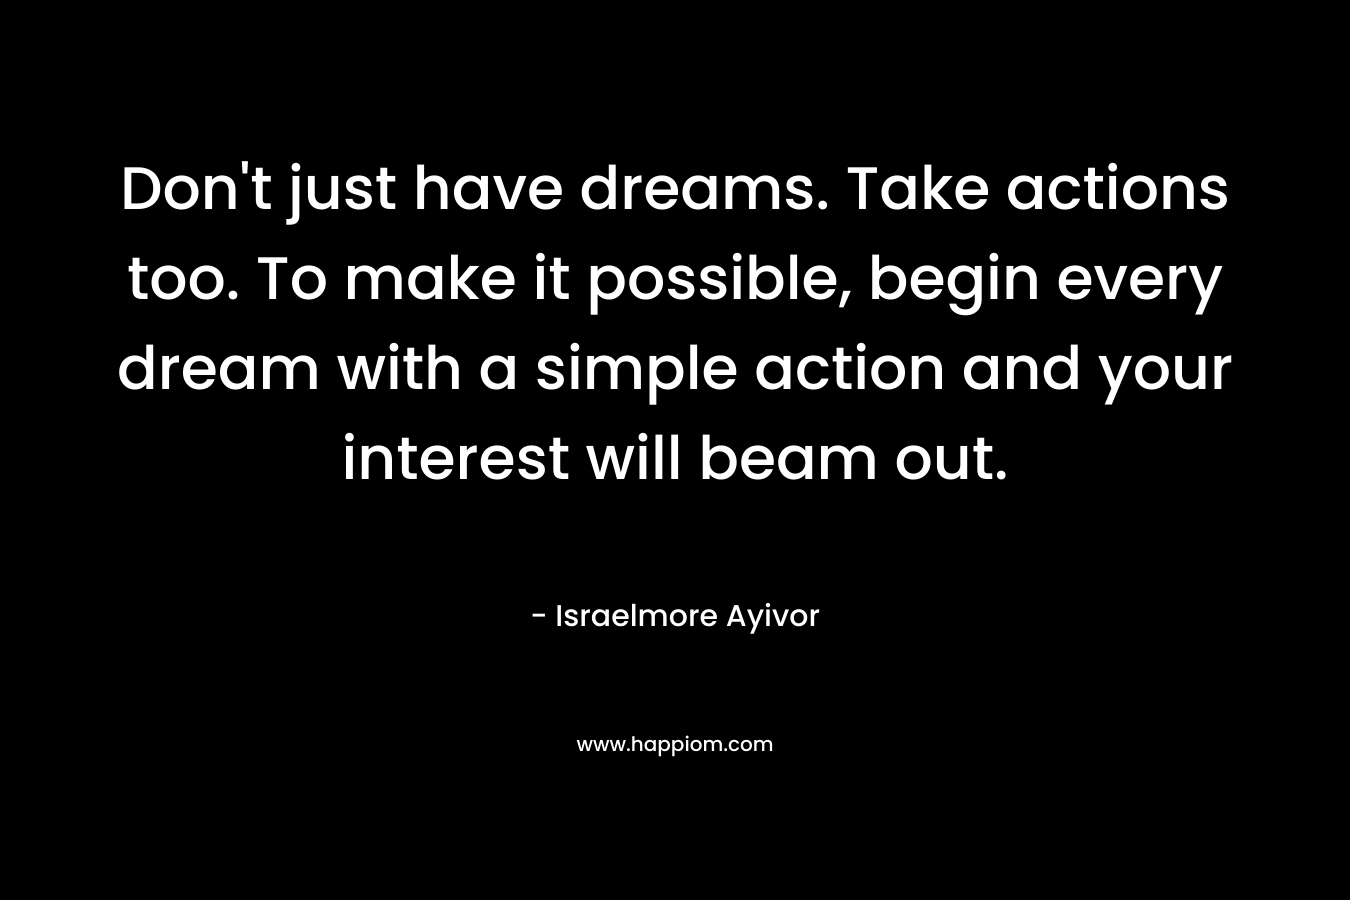 Don't just have dreams. Take actions too. To make it possible, begin every dream with a simple action and your interest will beam out.